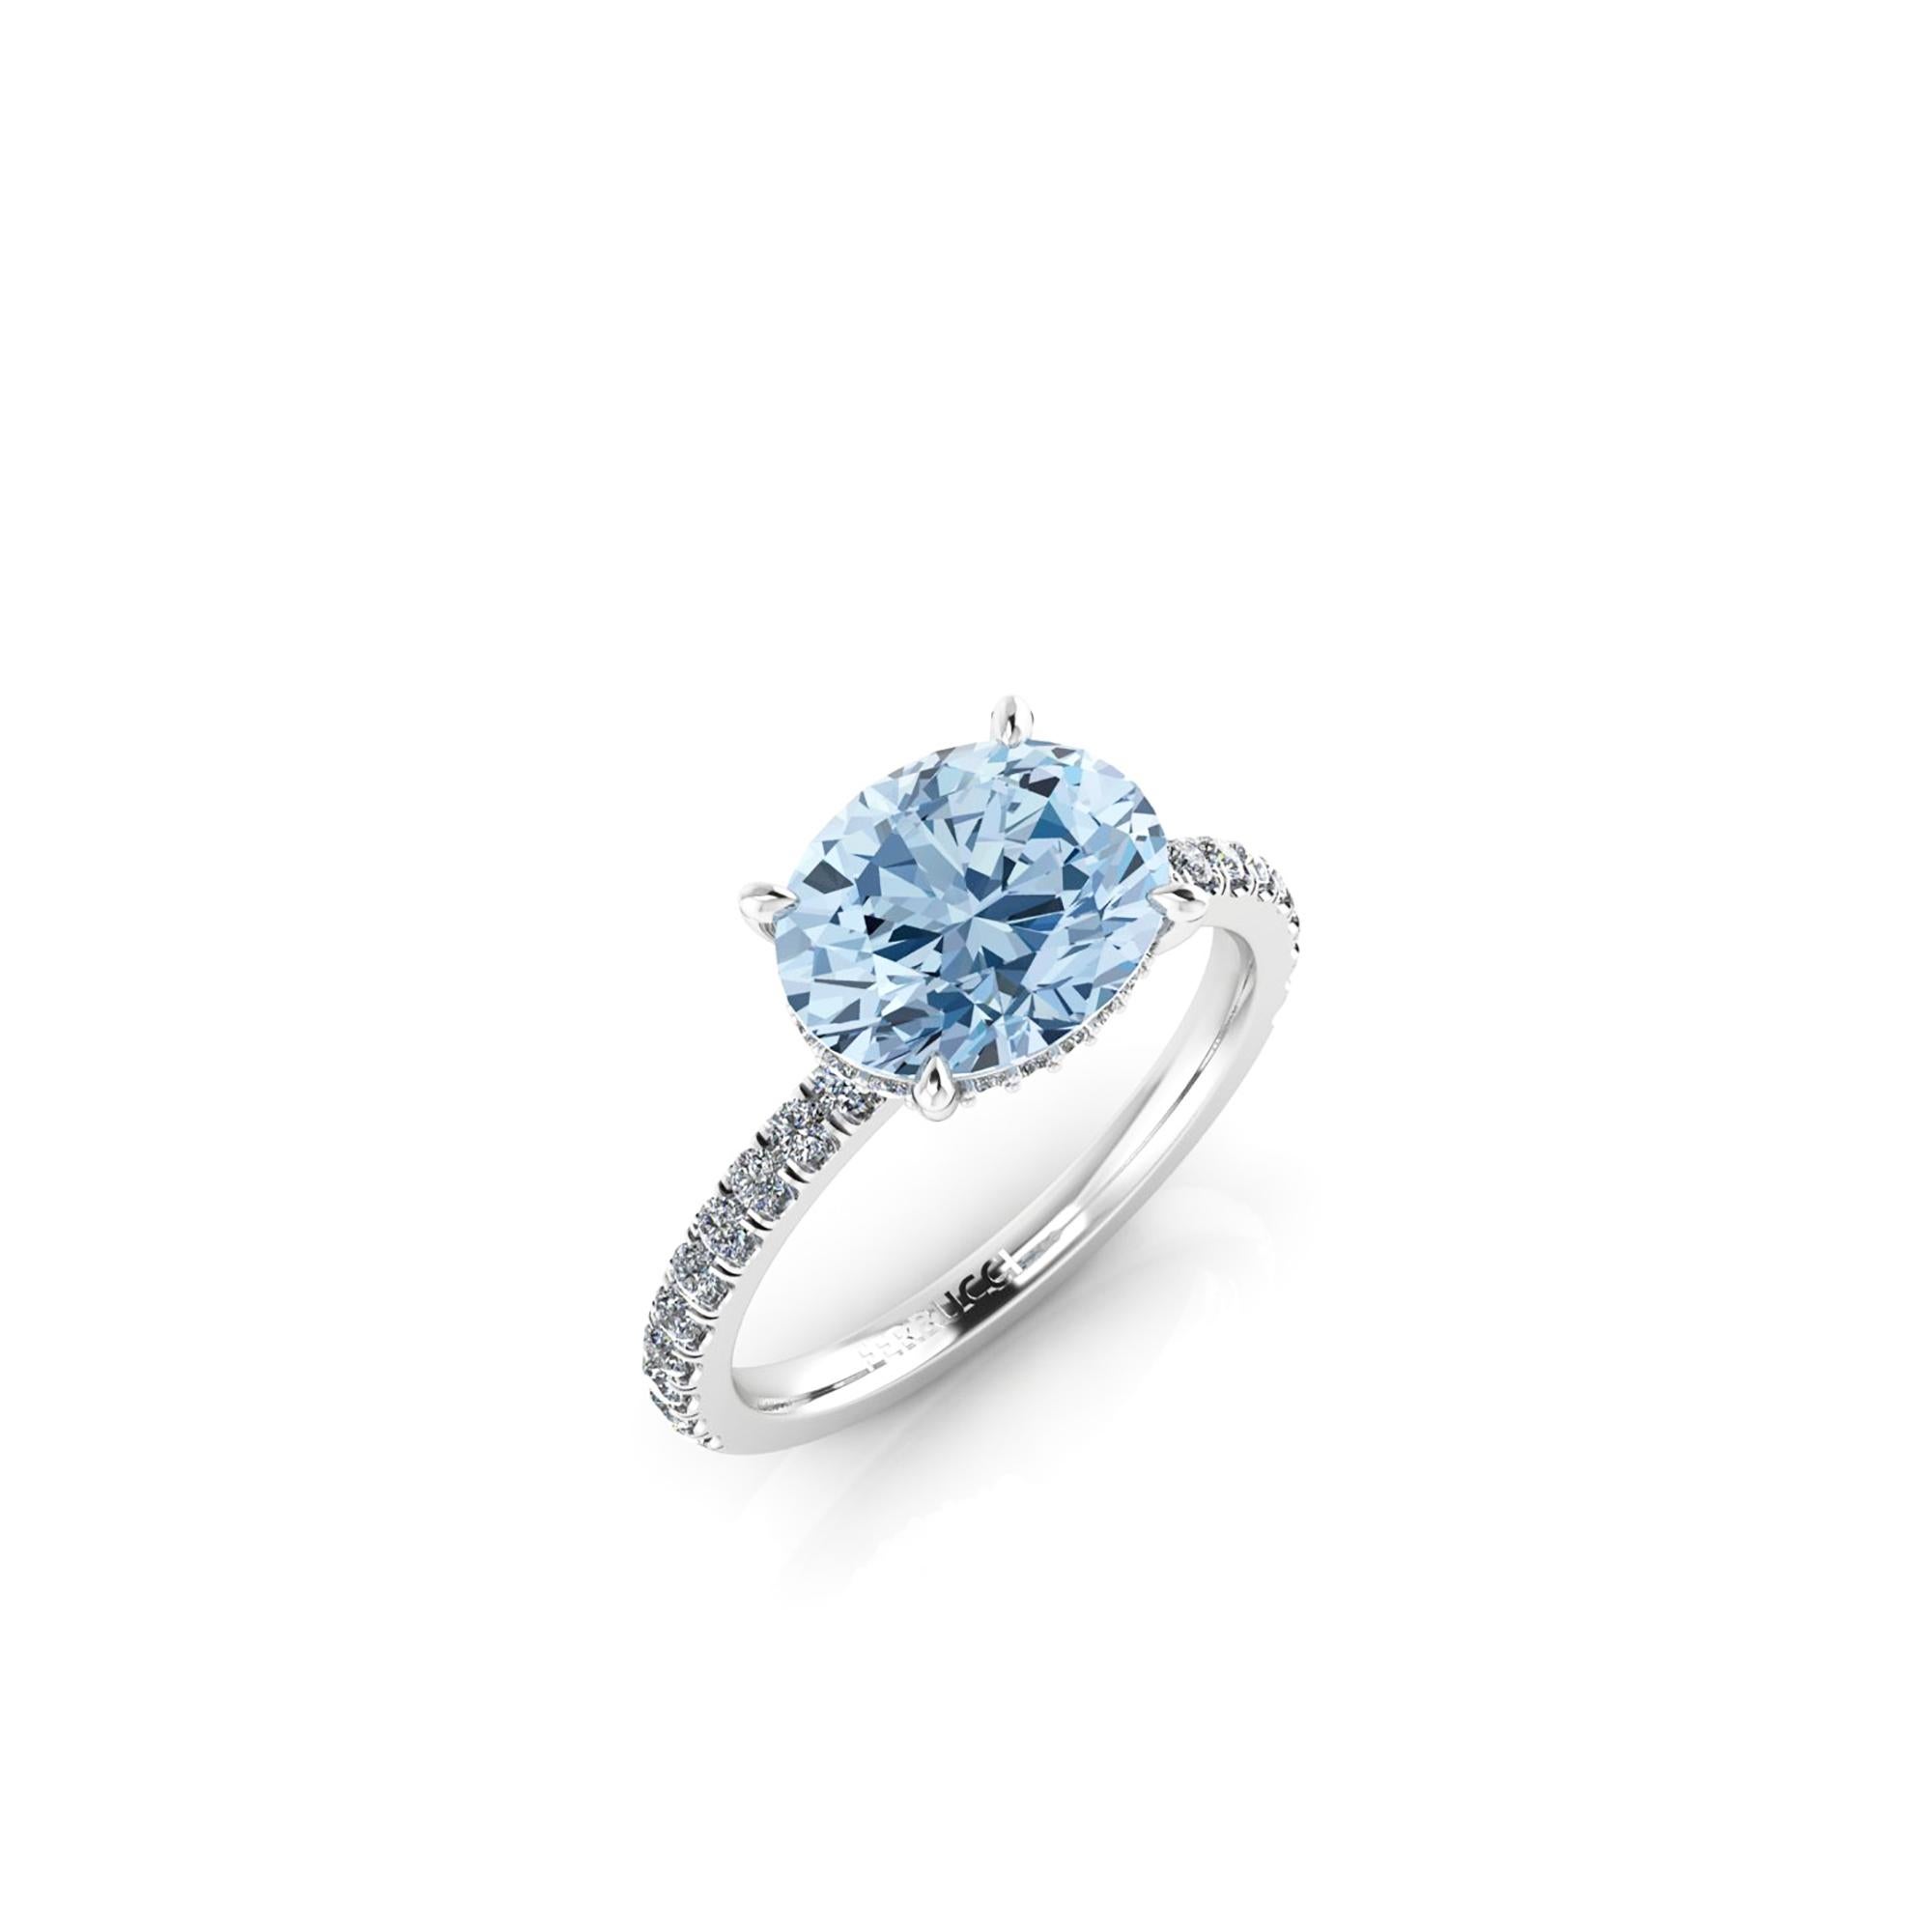 A  2.45 carat horizontal, set east to west Oval blue Aquamarine, set on a Platinum 950 ring, designed and hand made in New York 
adorned by white round diamonds, hand set, for an approximate 0.60 carats, for a maximum shine and sparkle.

This ring